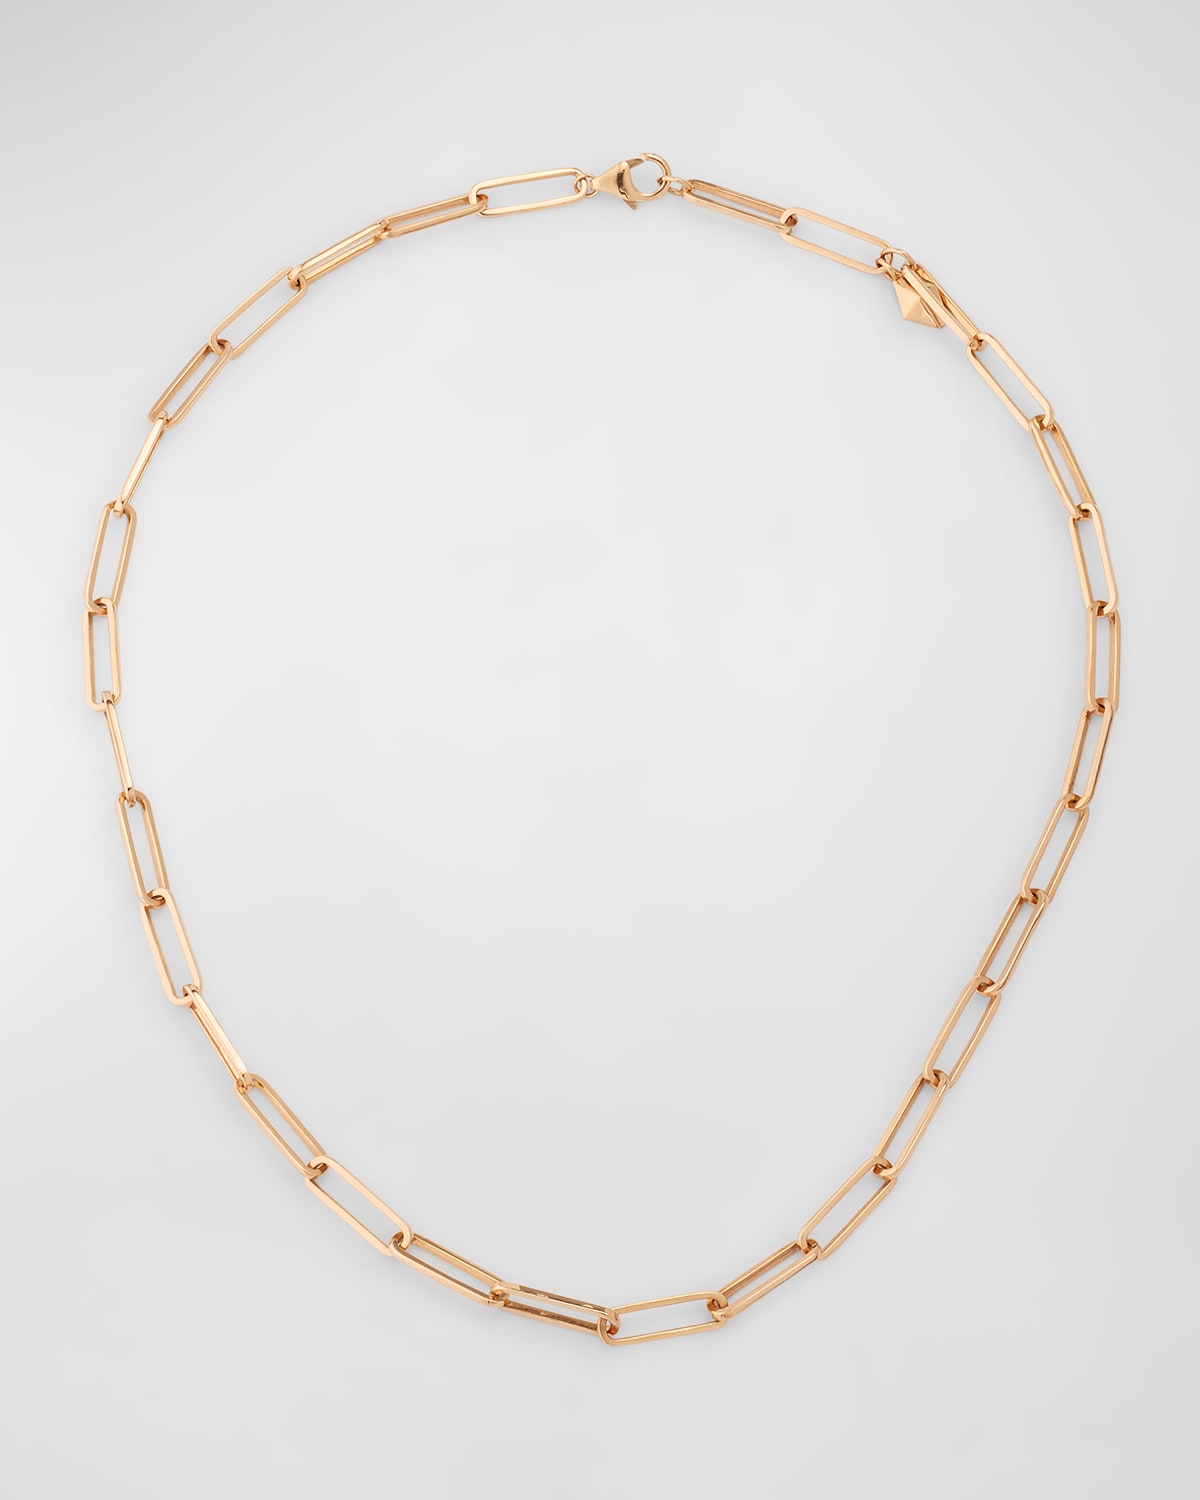 Rose Gold Large Elongated Chain Necklace, 16"L